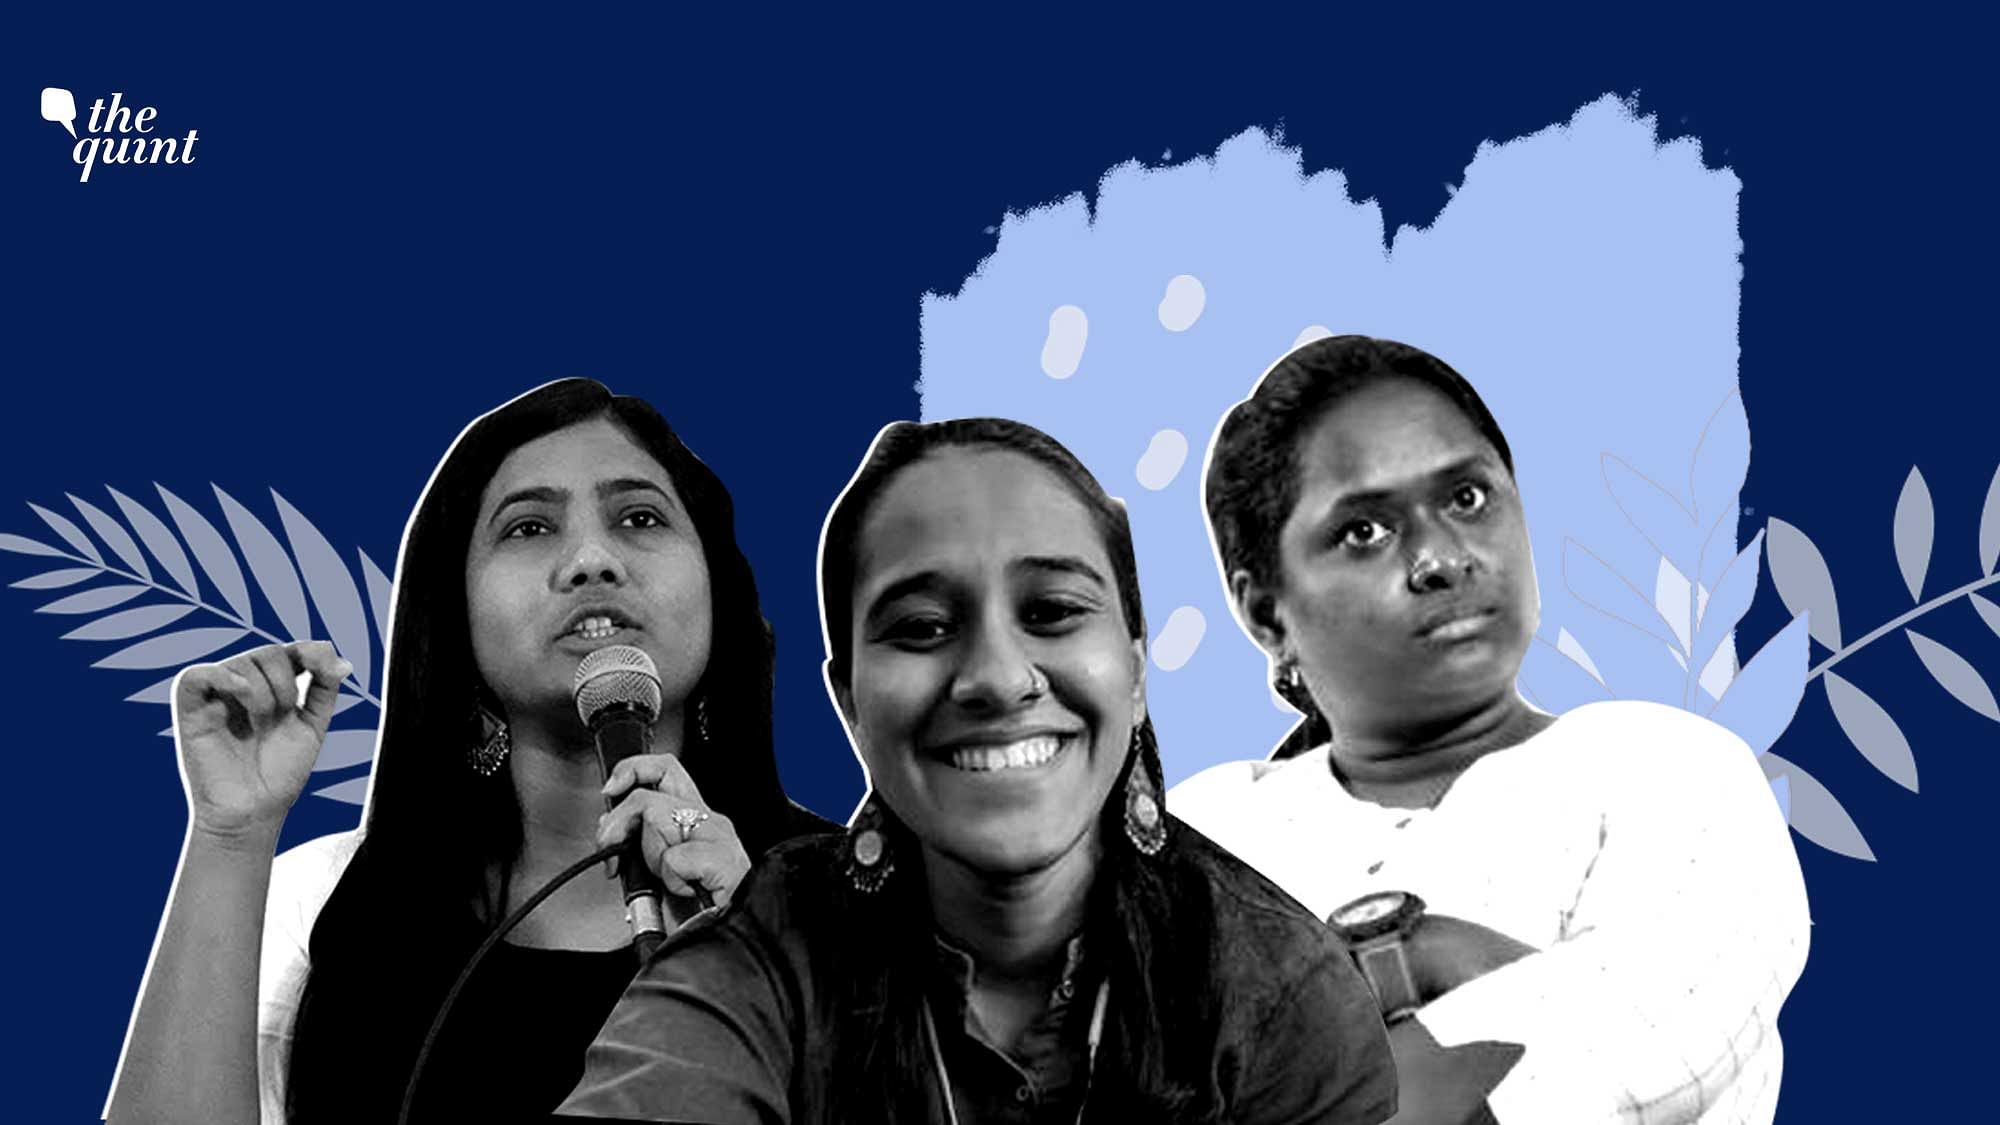 Need to hold accountable the upper caste community for perpetuating the oppression before we talk mental health, say Dalit women.